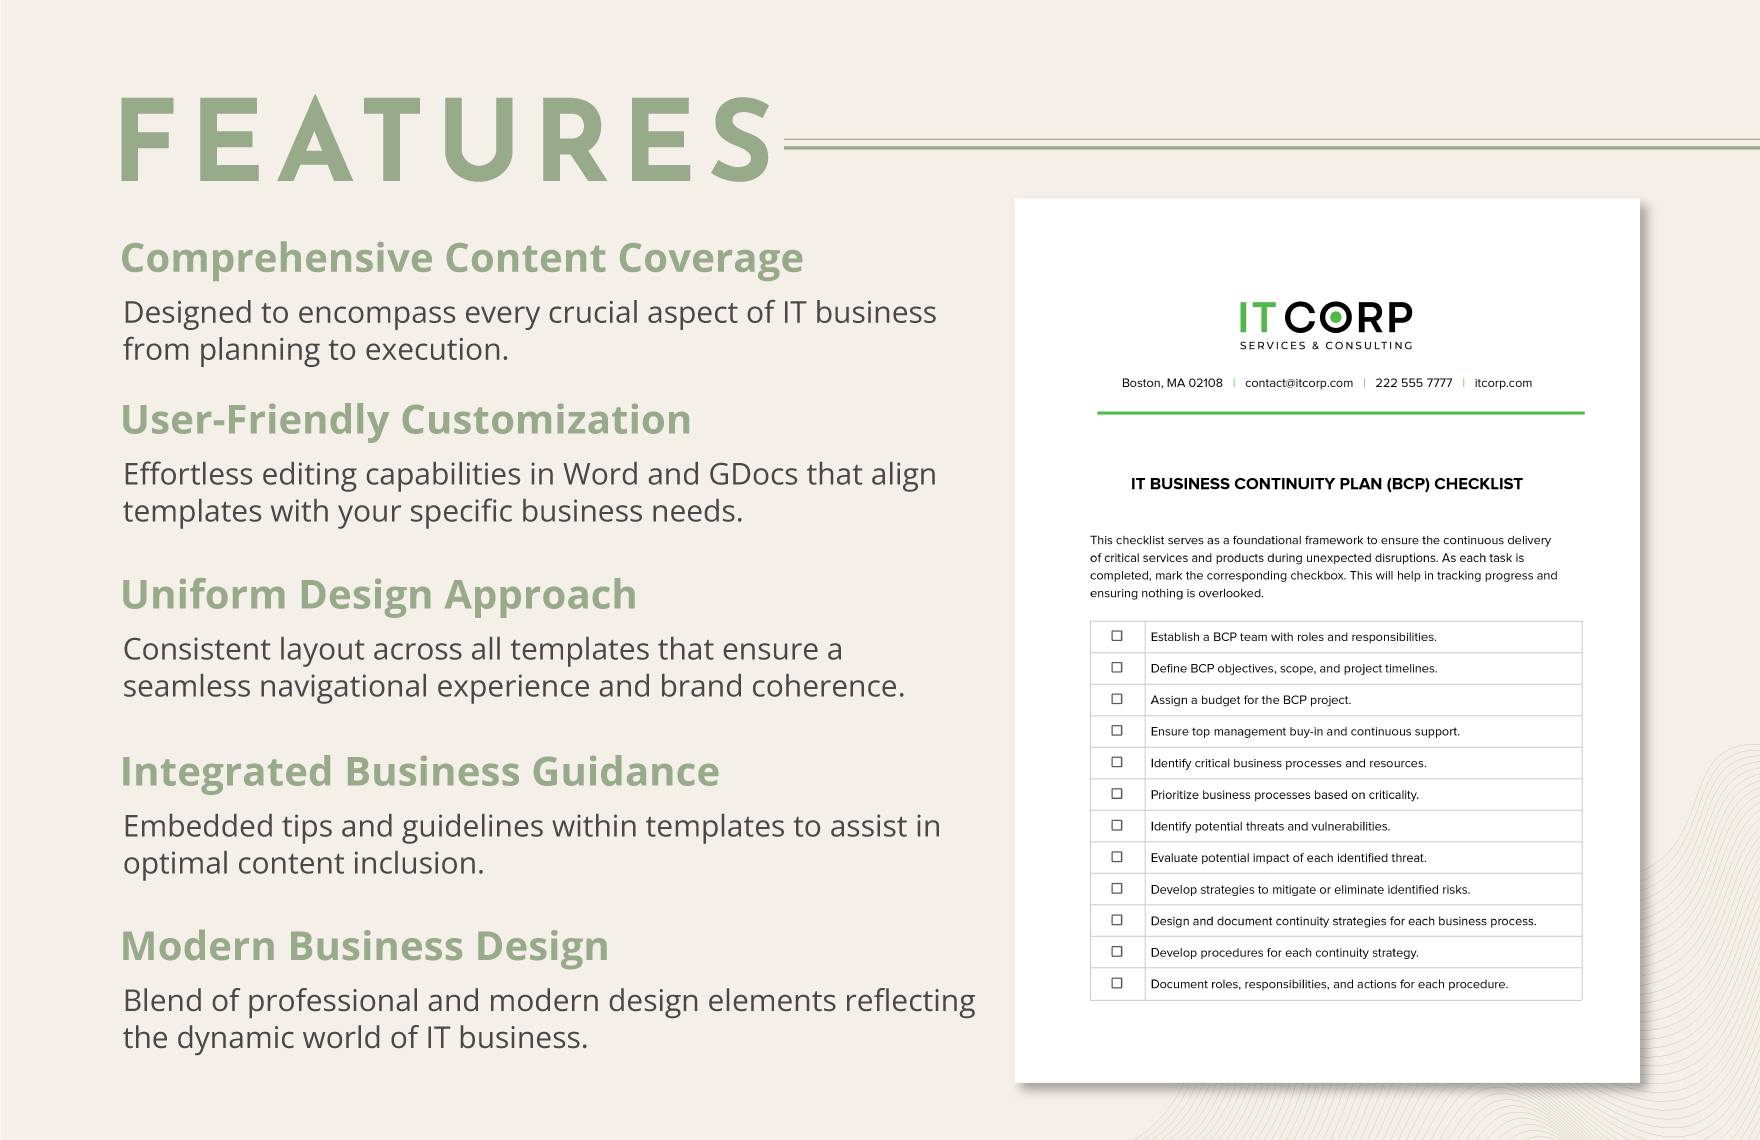 IT Business Continuity Plan (BCP) Checklist Template